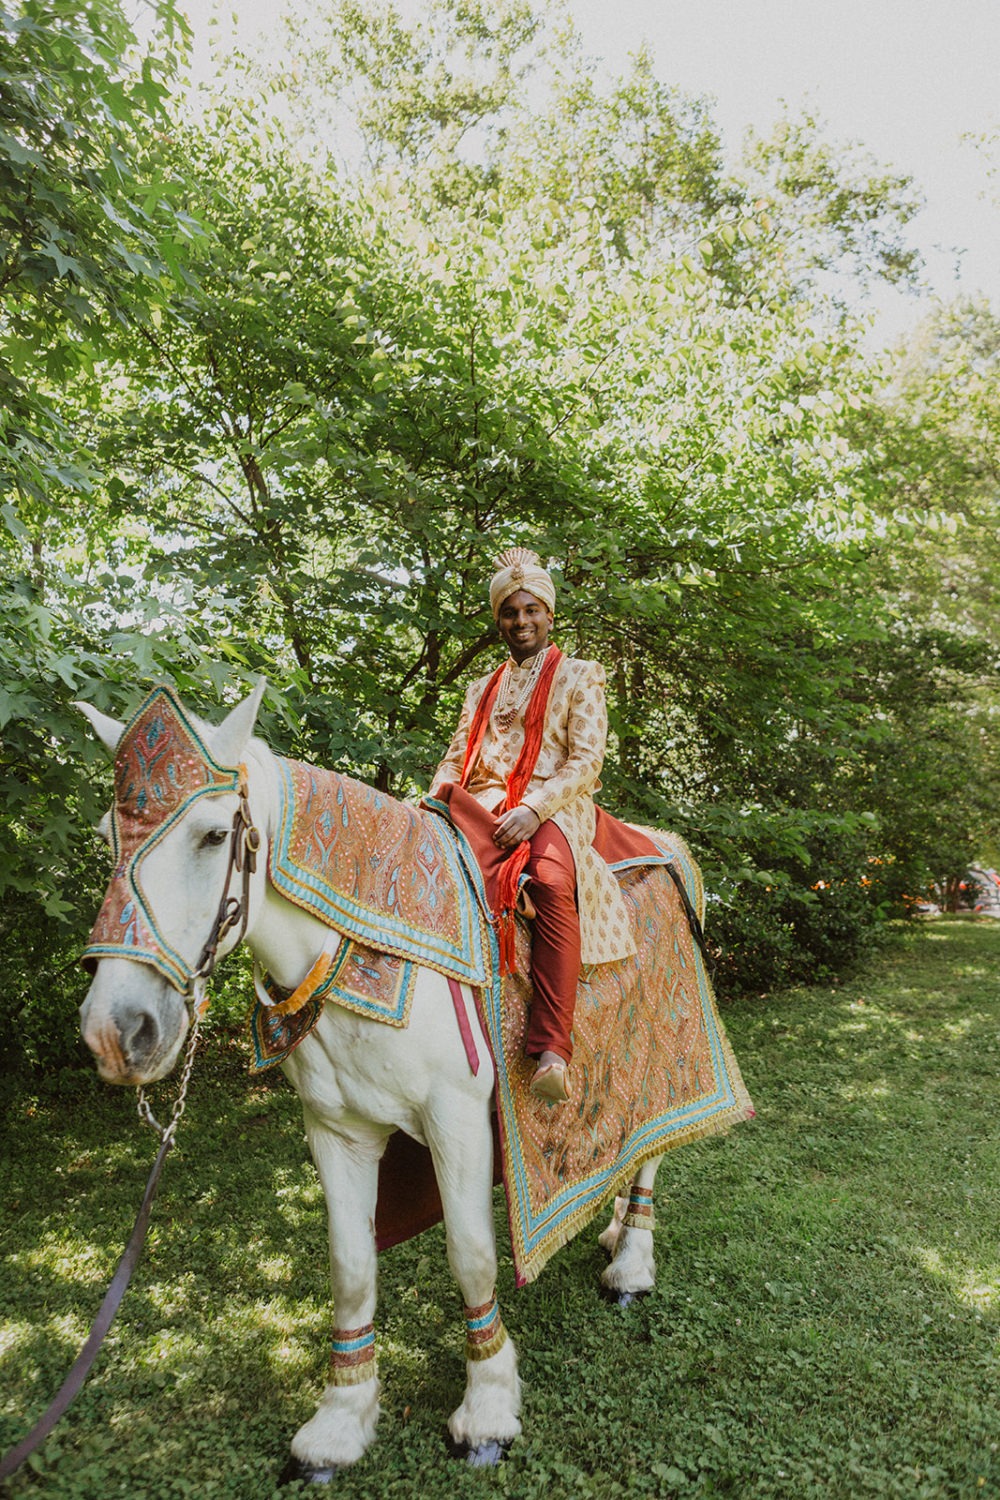 groom rides on horse as part of hindu wedding traditions